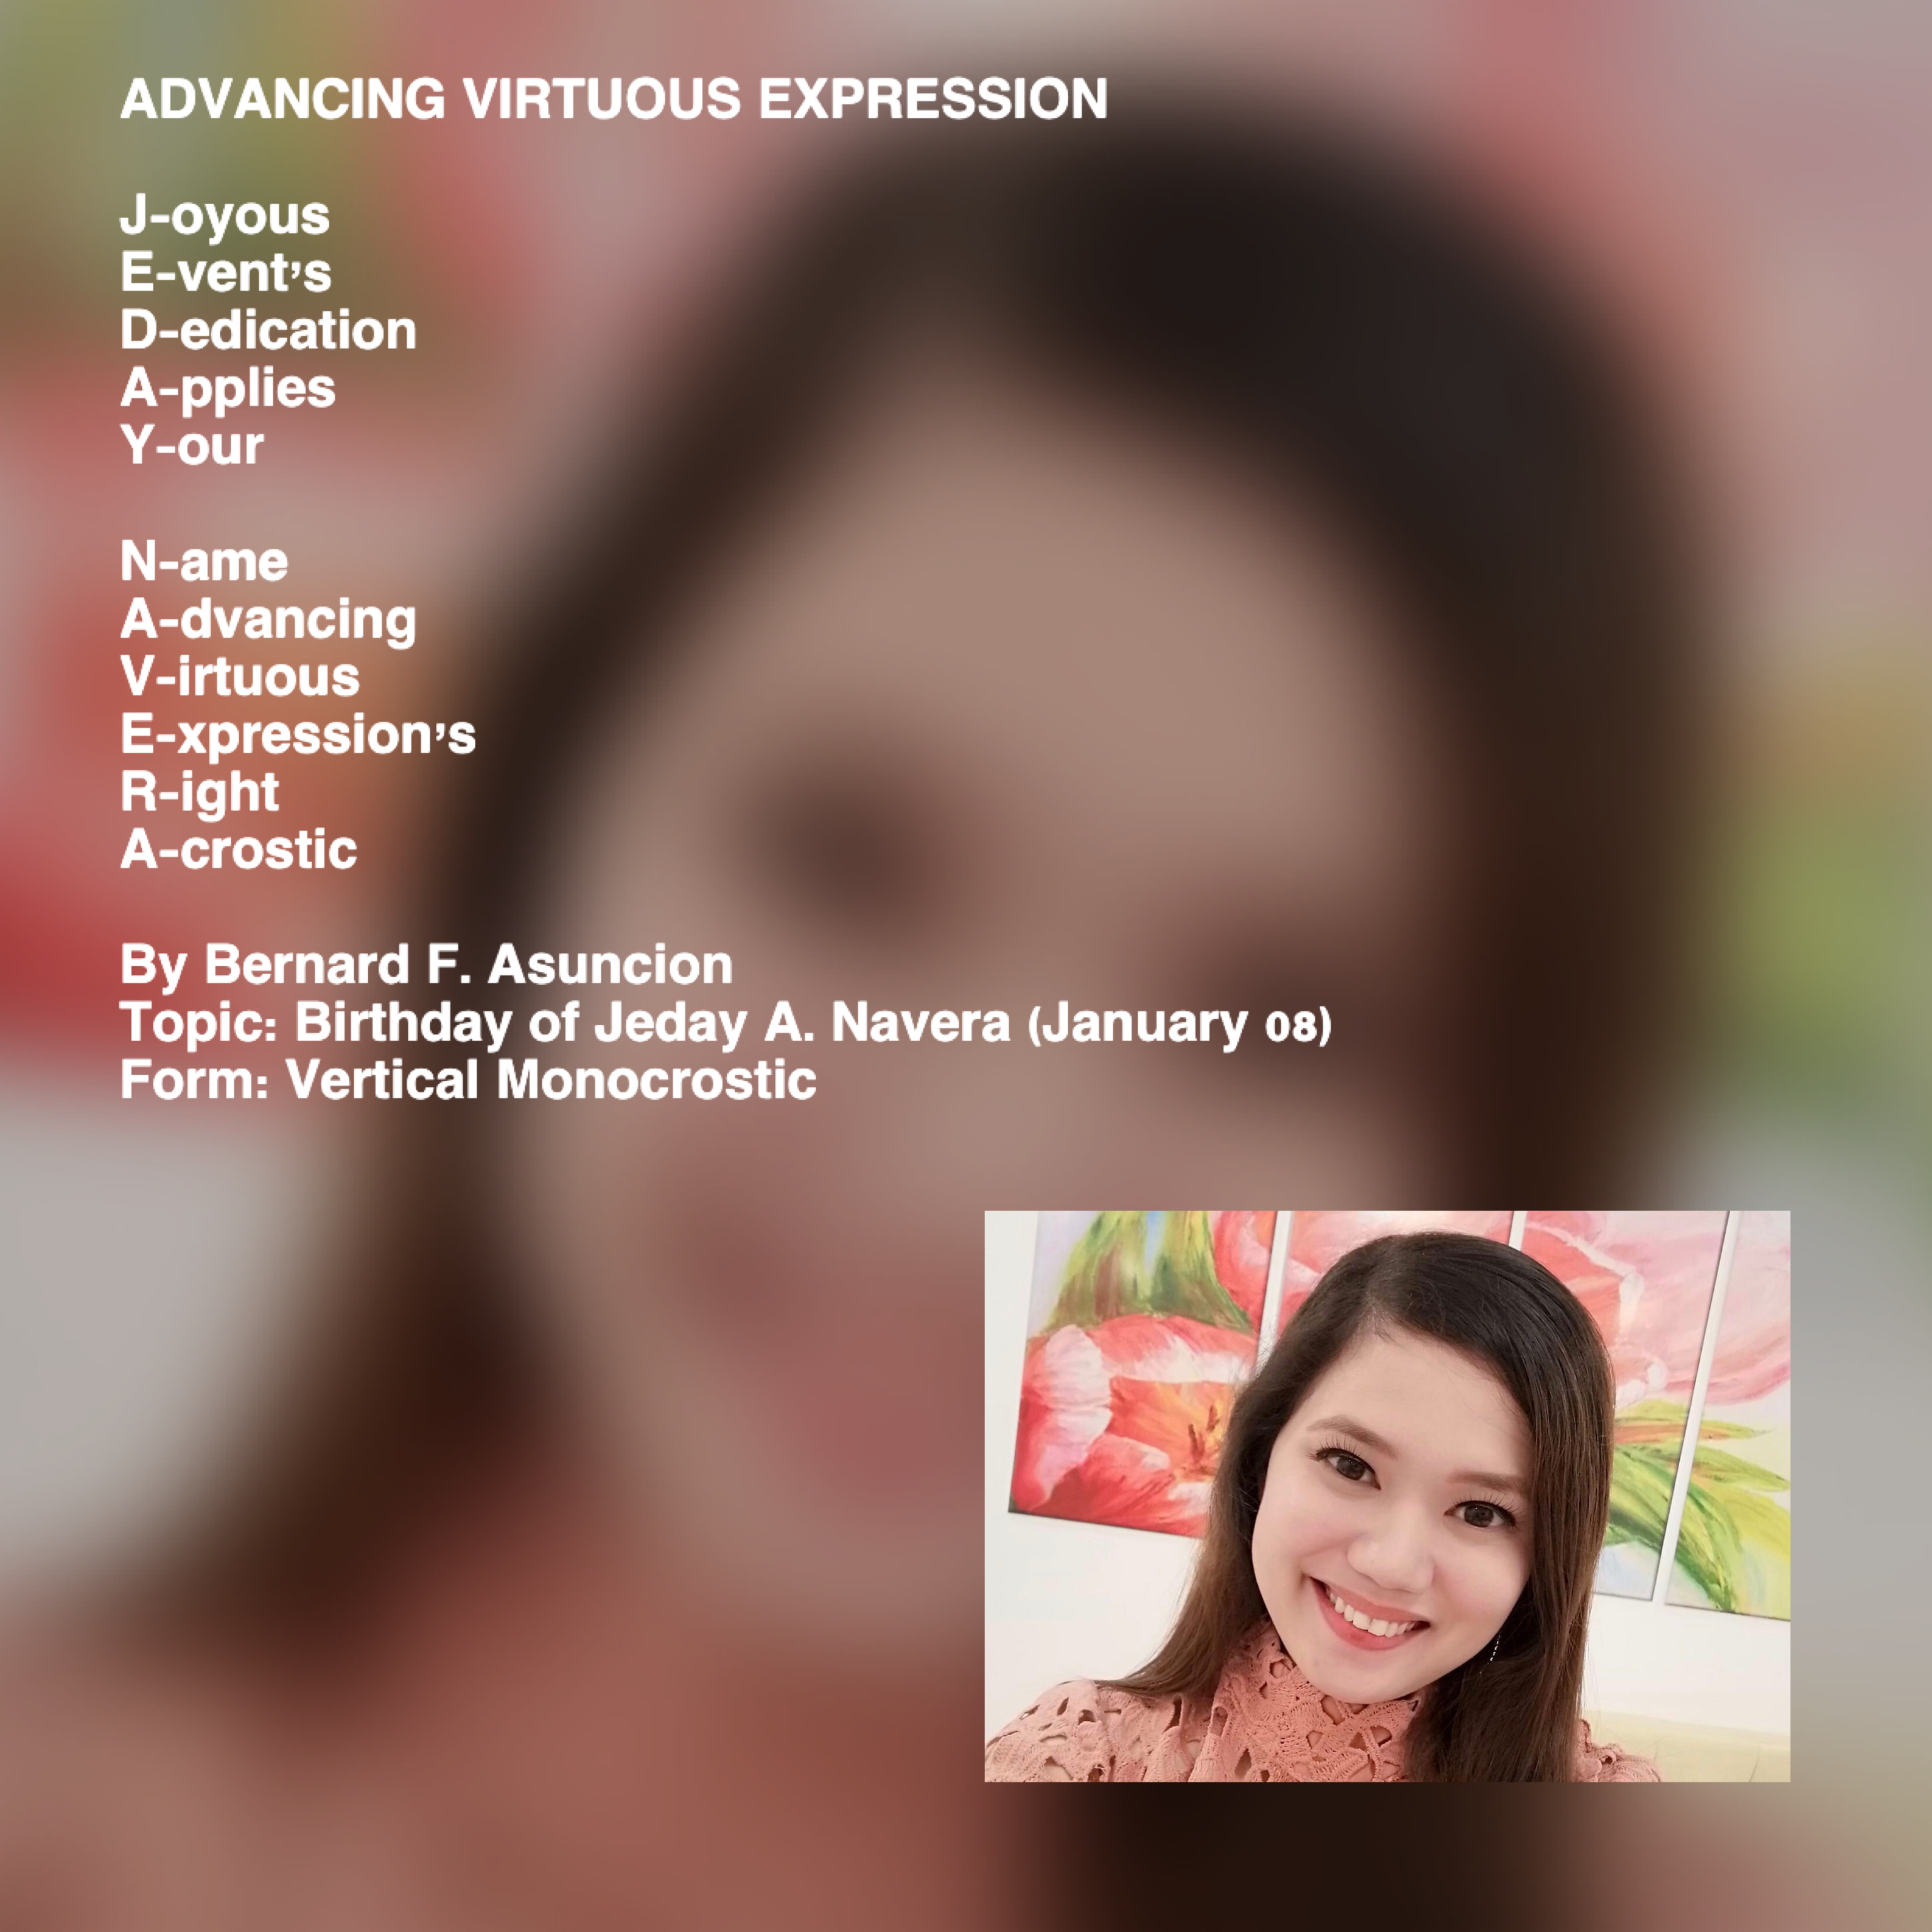 Advancing Virtuous Expression